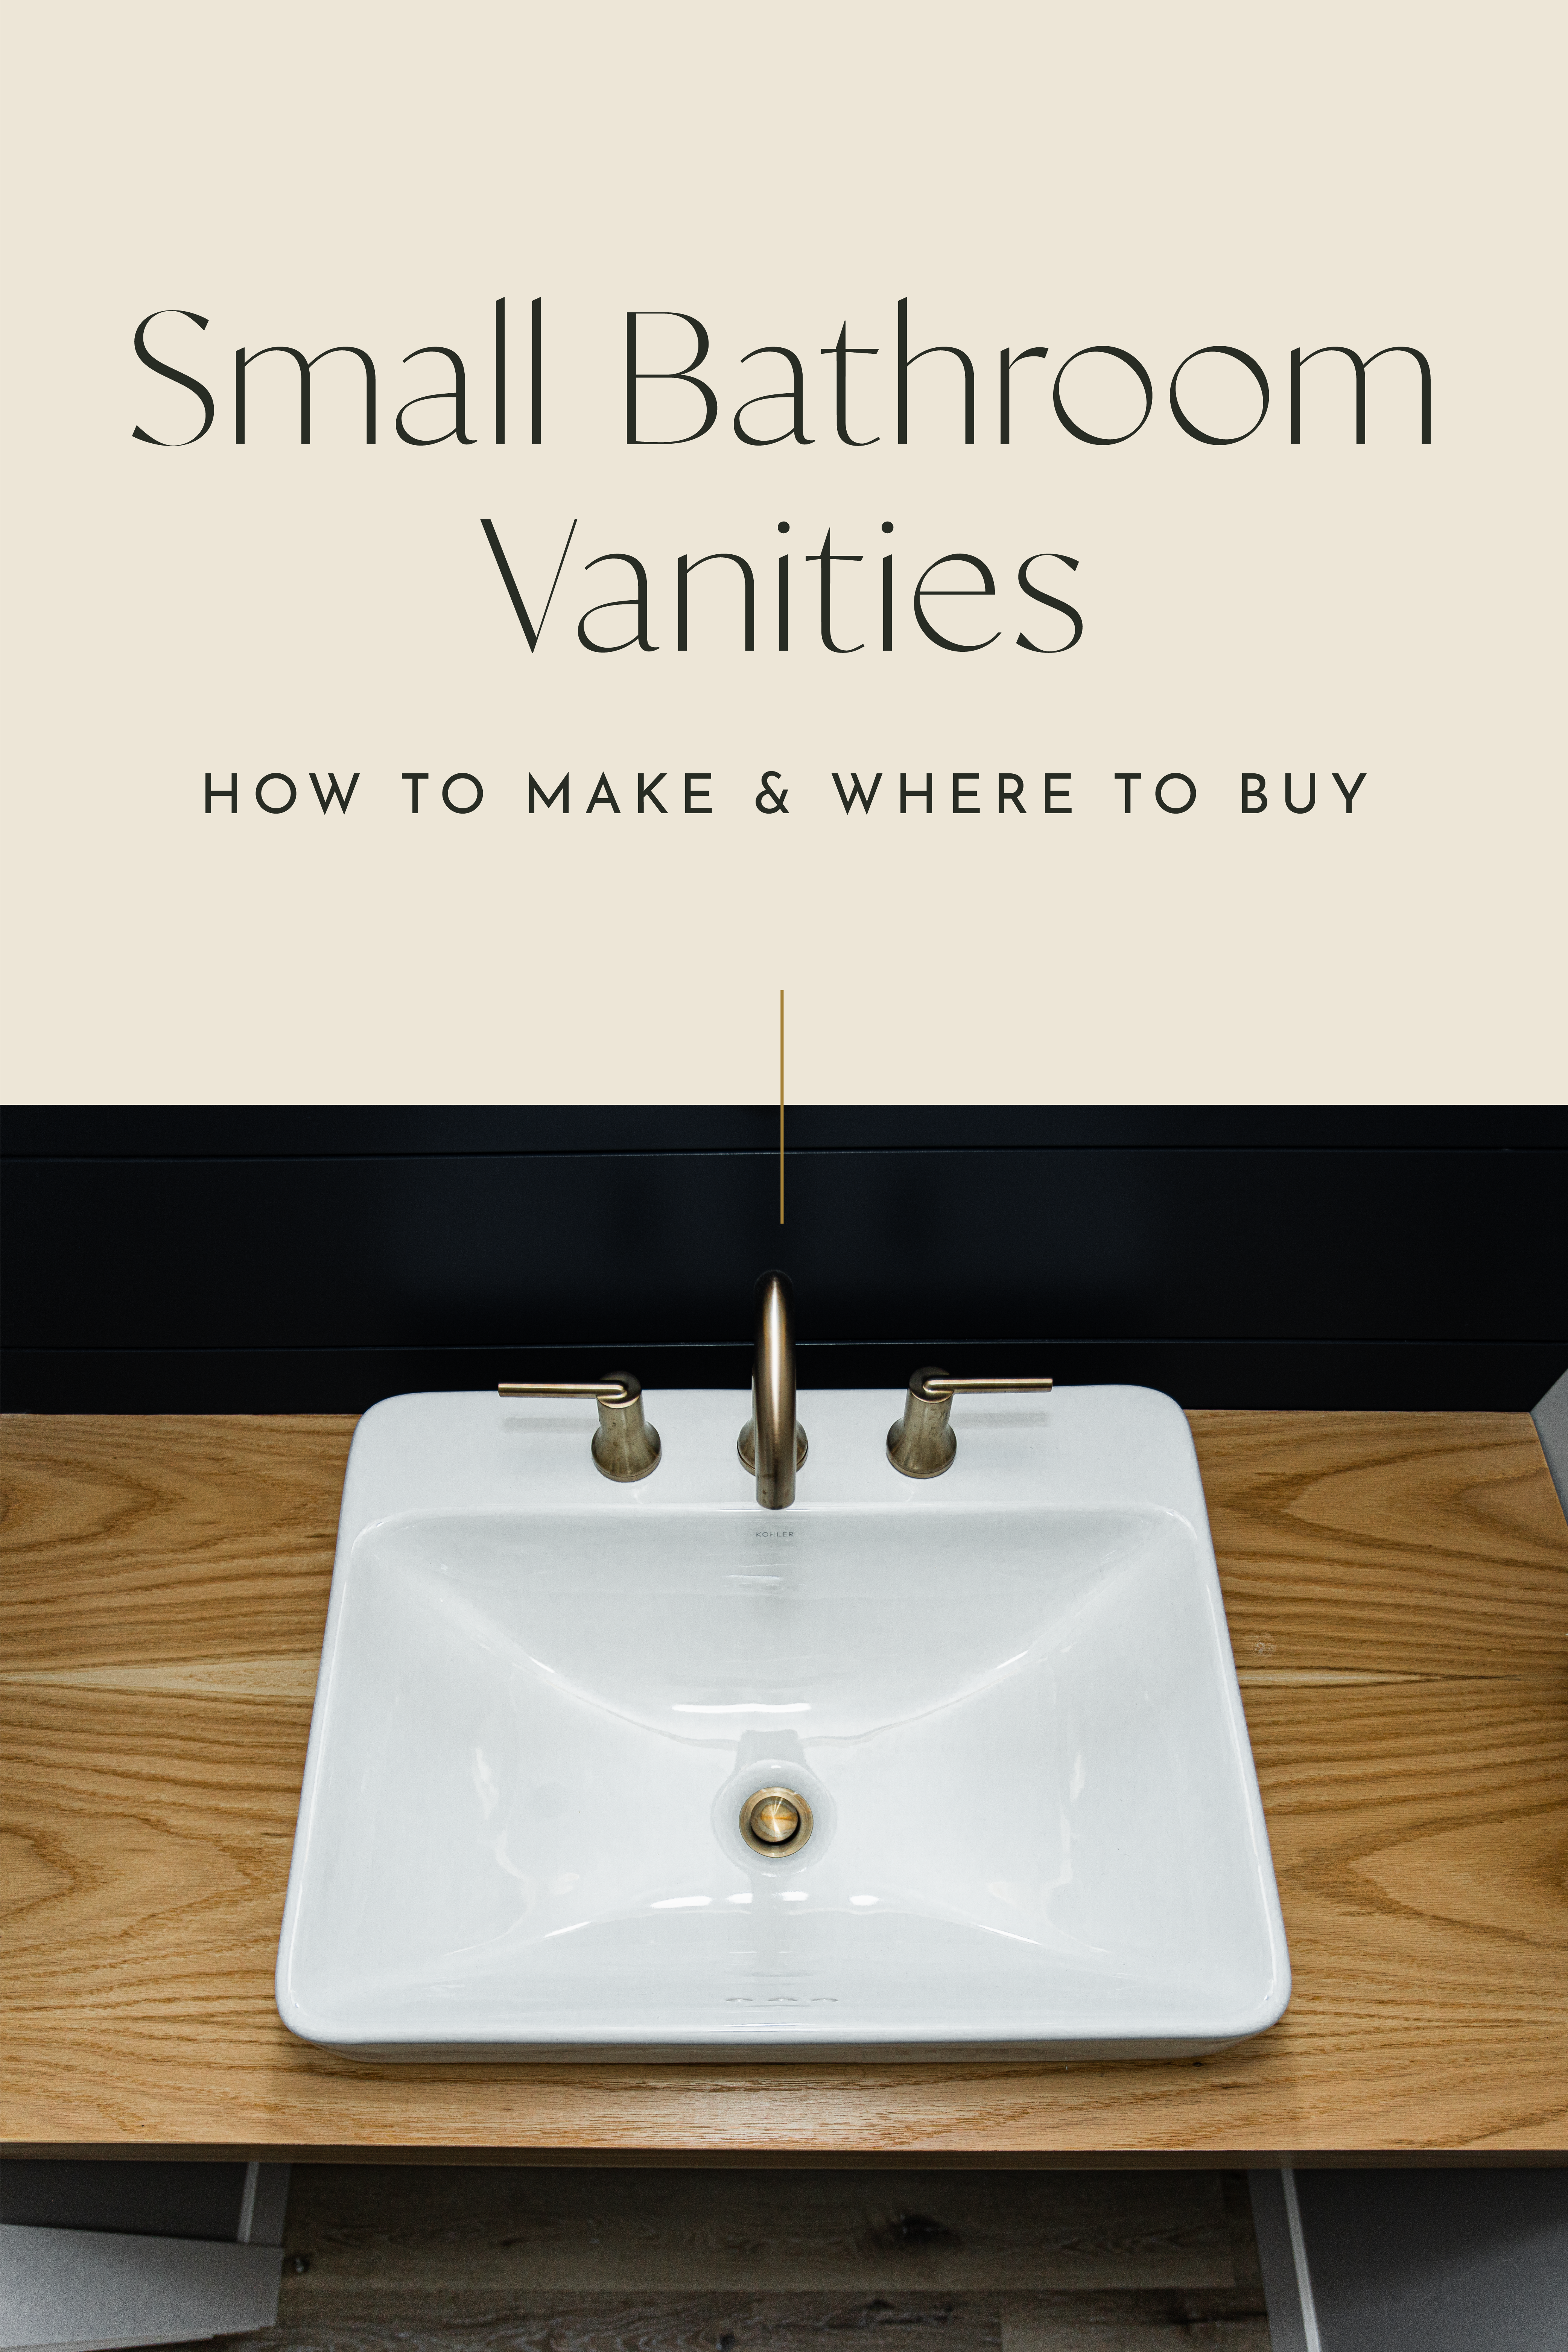 Small Bathroom Vanities | How to Make & Where to Buy 1